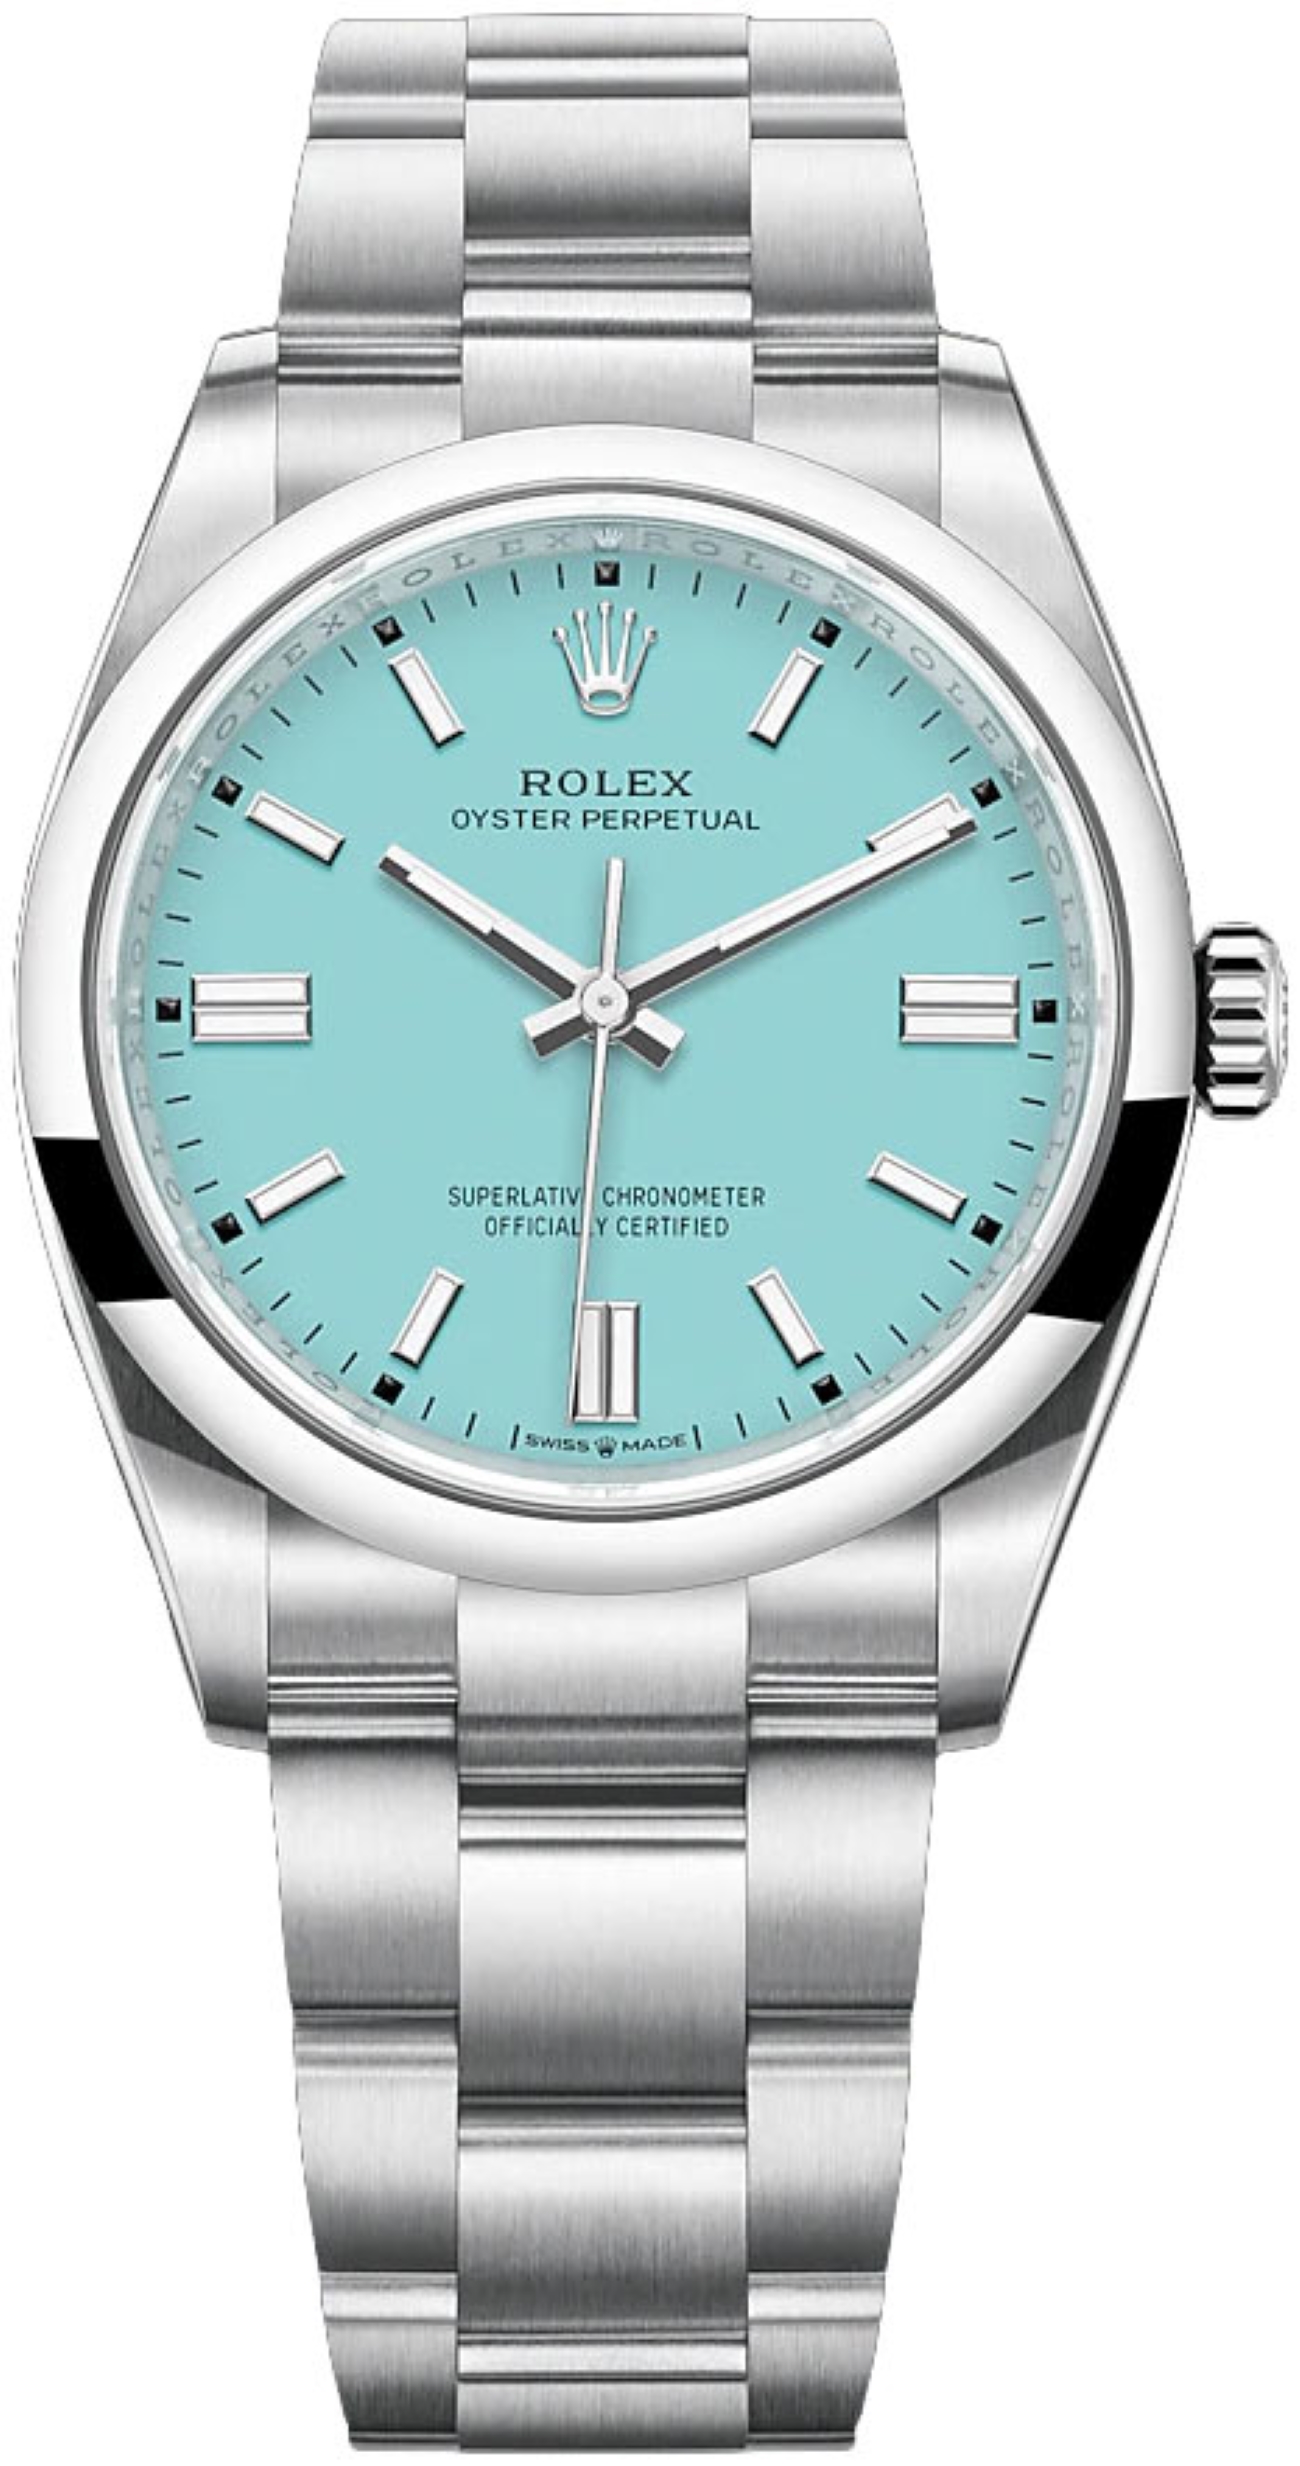 ROLEX OYSTER PERPETUAL TIFANNY BLUE DIAL 36MM REF: 126000